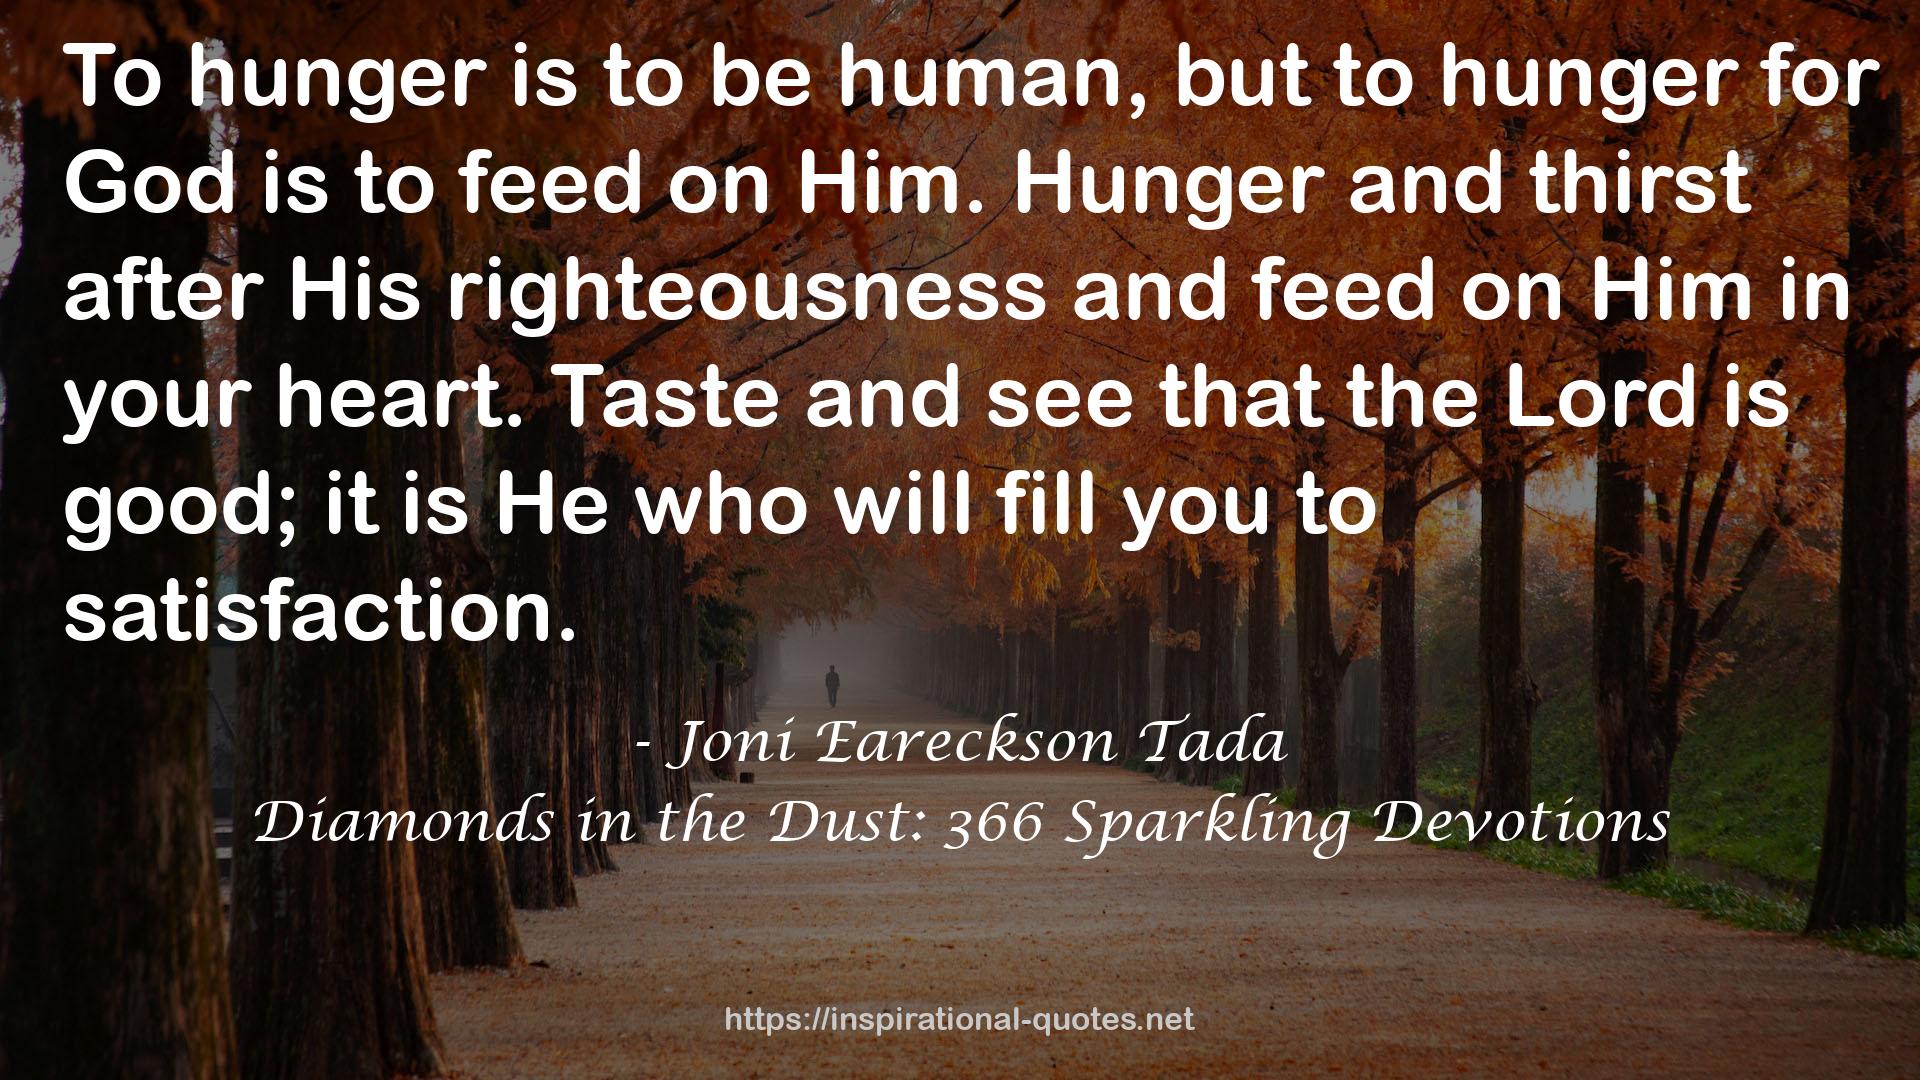 Diamonds in the Dust: 366 Sparkling Devotions QUOTES